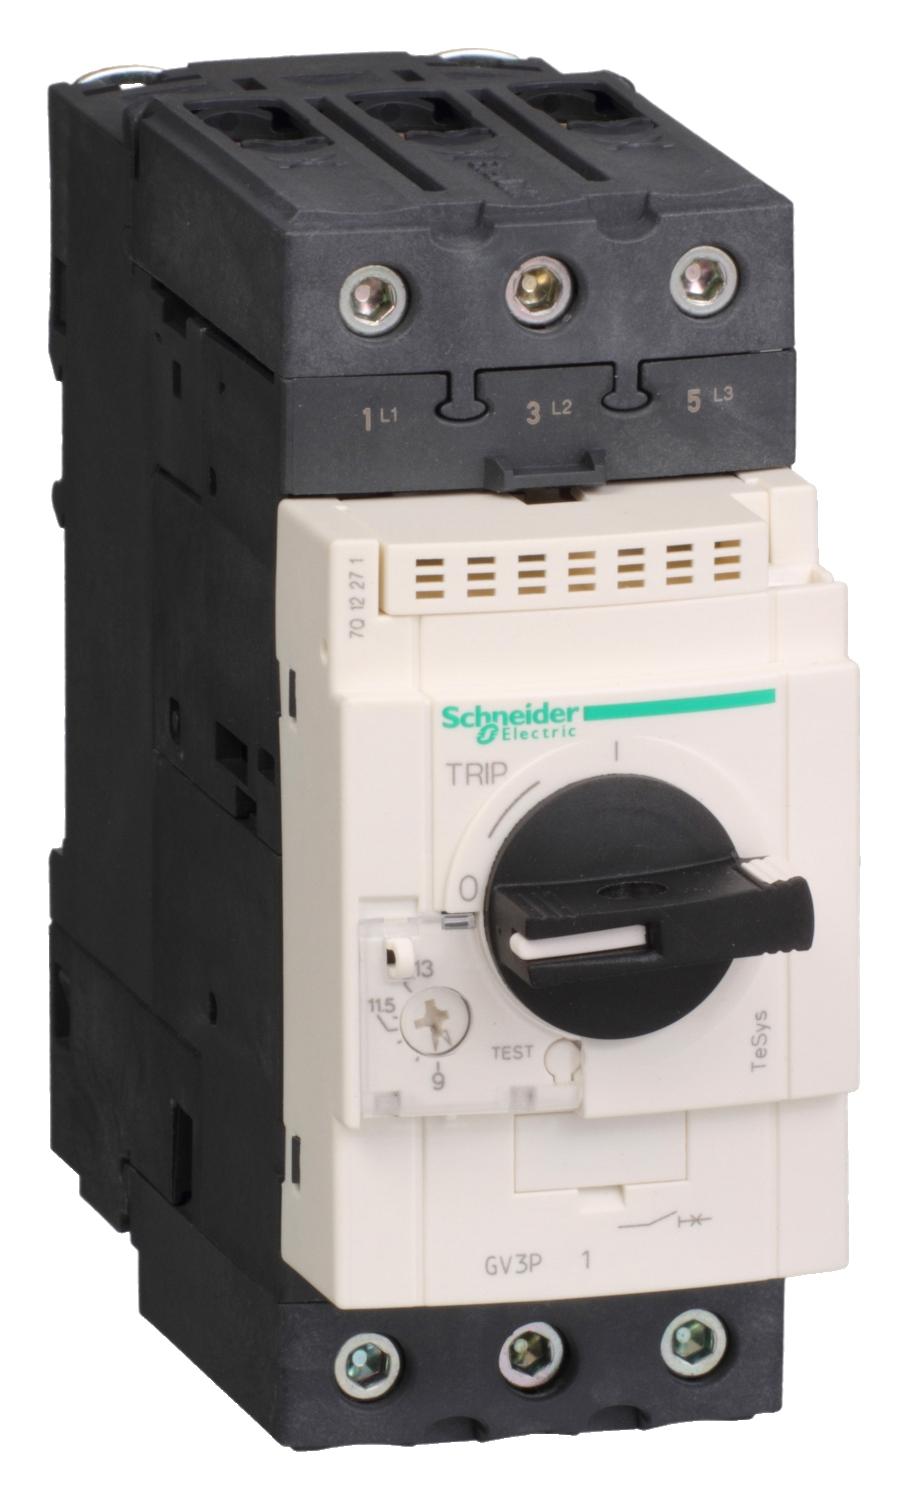 GV3P32 THERMOMAGNETIC CKT BREAKER, 3P, 32A SCHNEIDER ELECTRIC